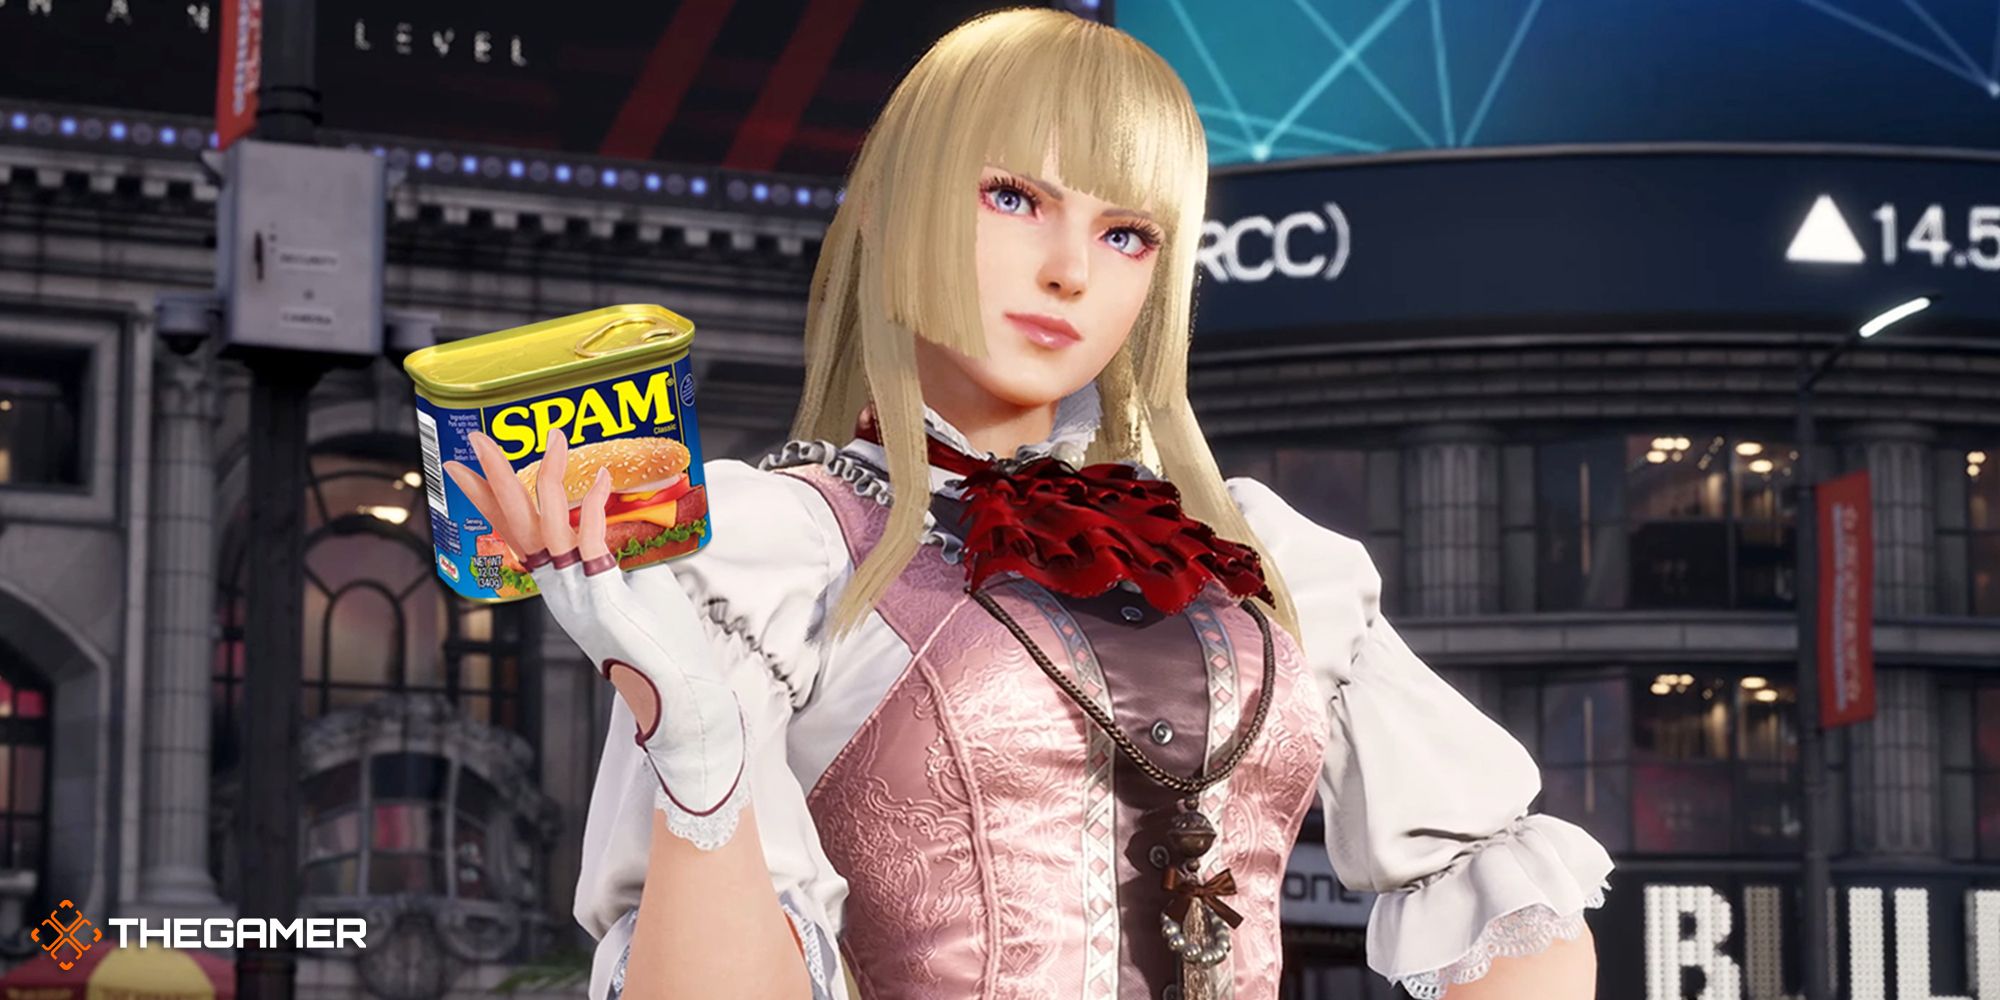 Lili from Tekken holding up a can of spam